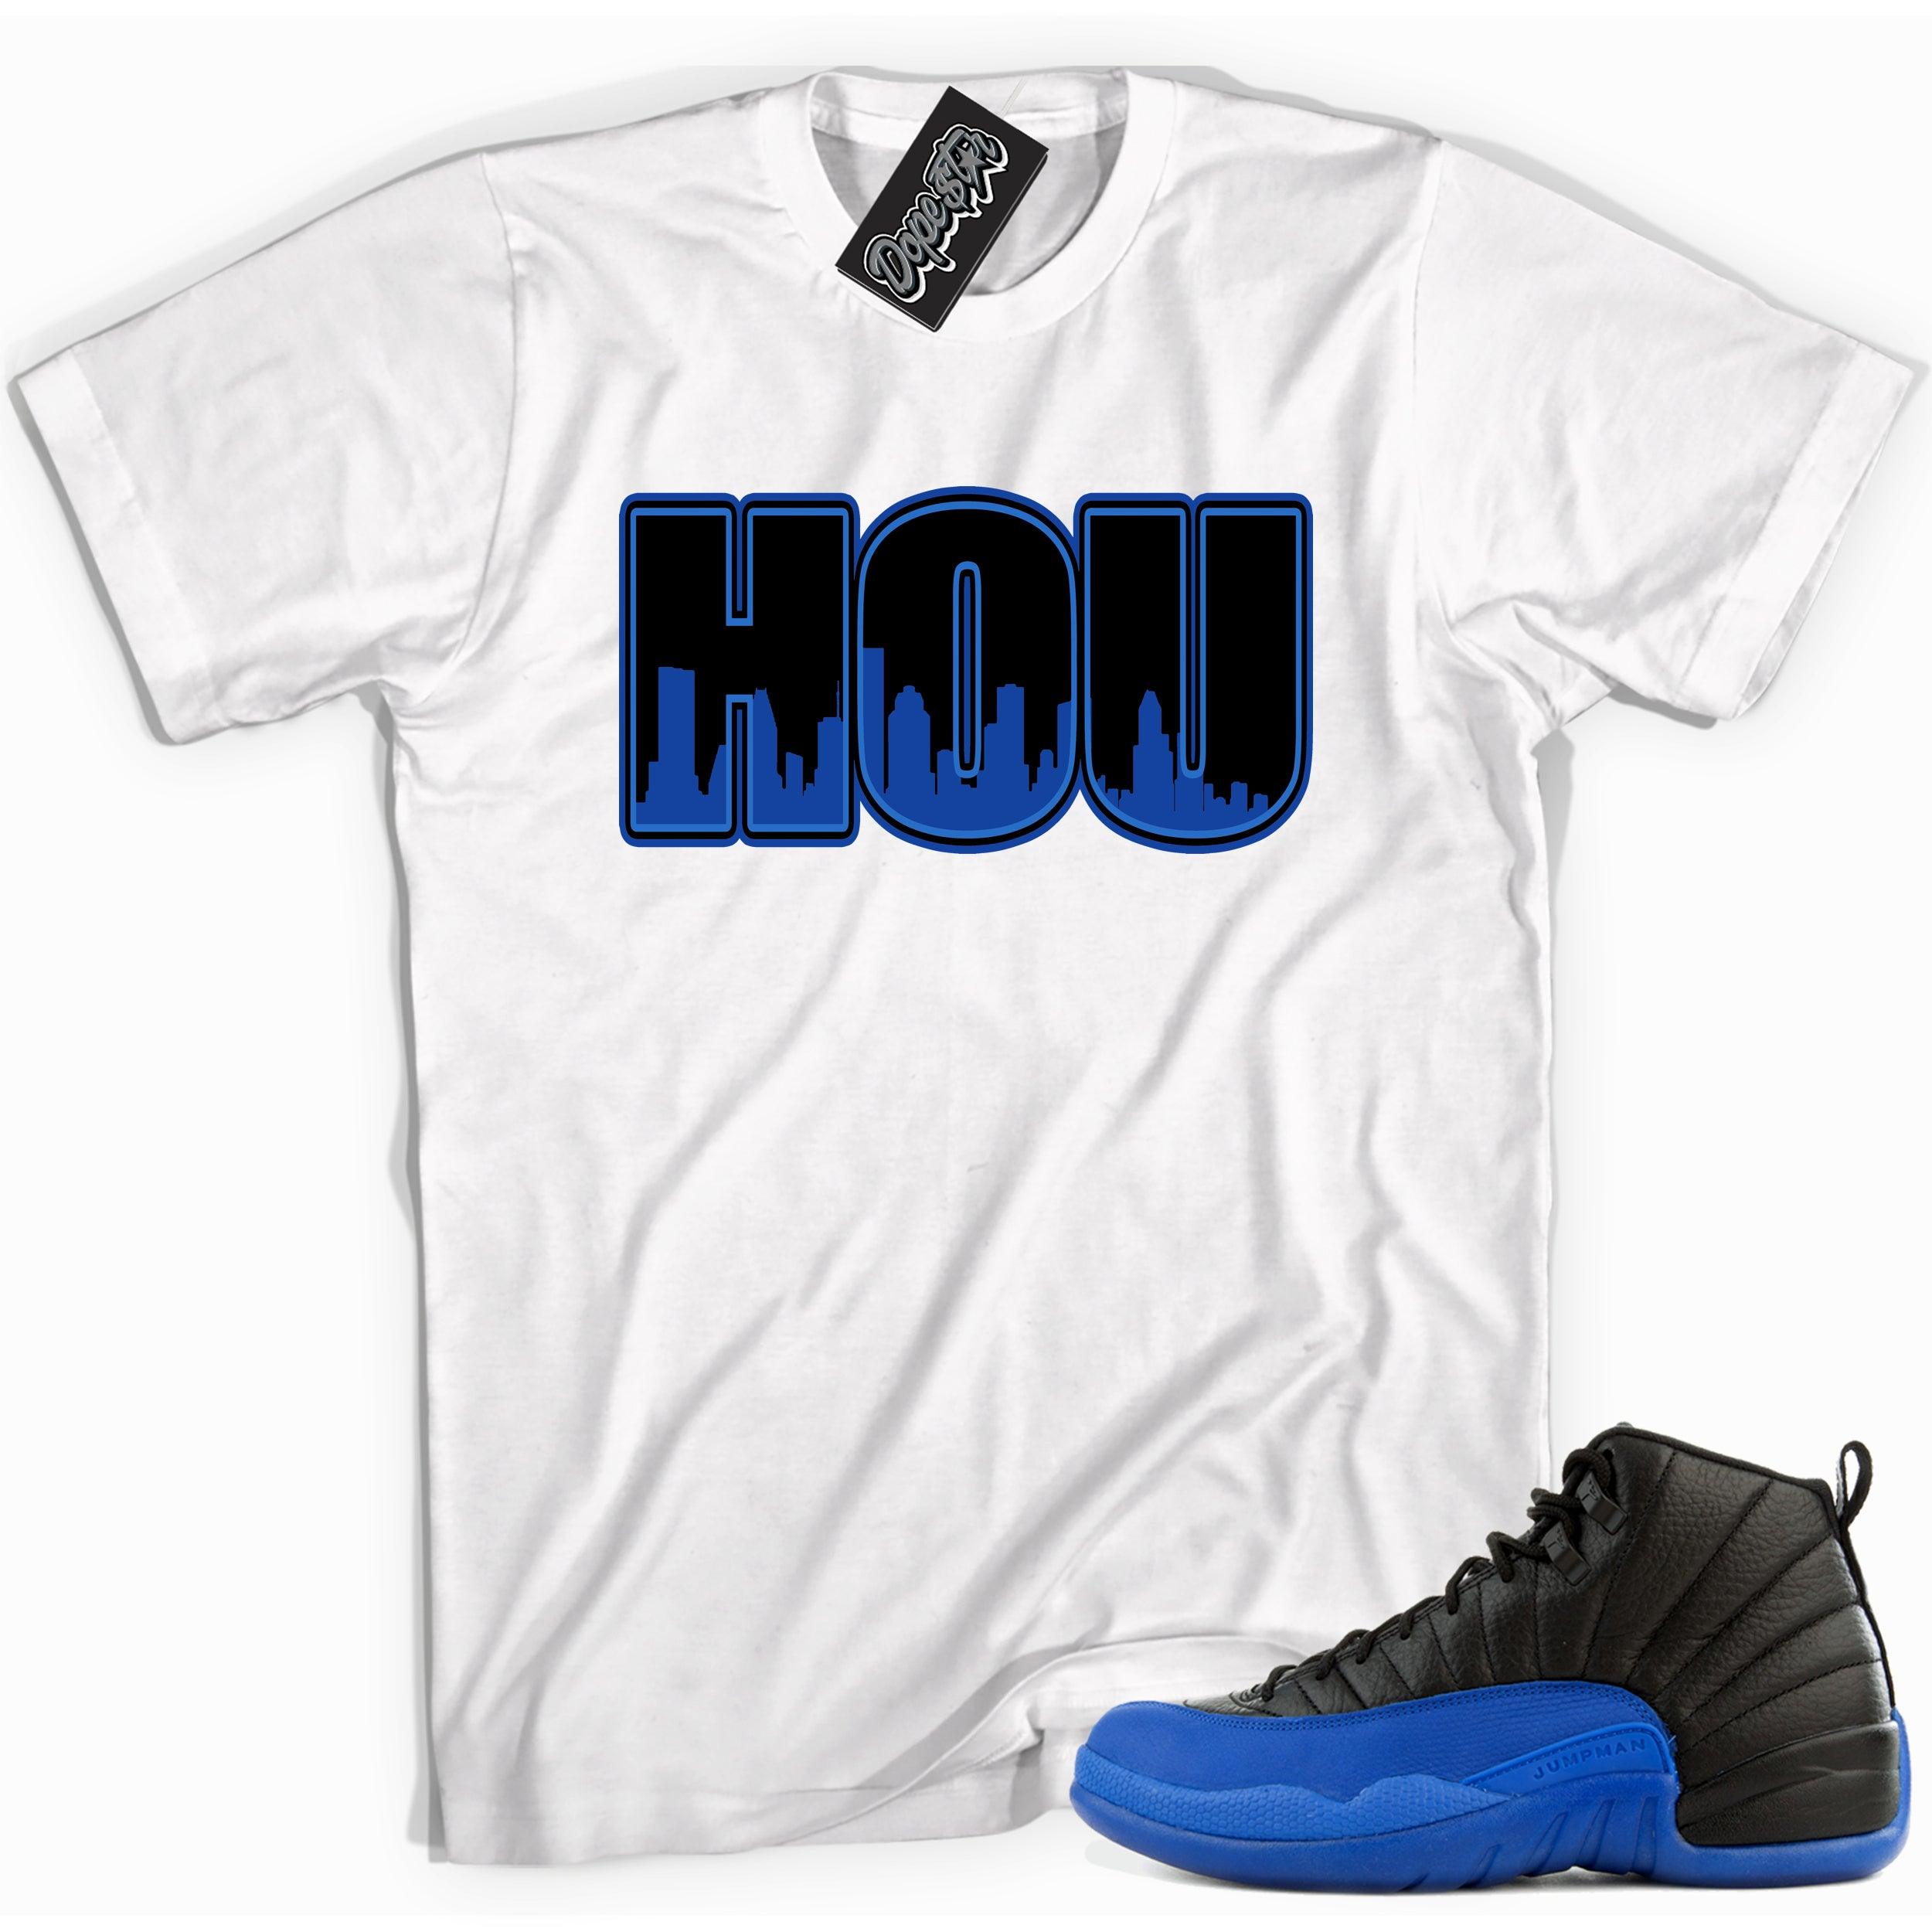 Cool white graphic tee with 'houston' print, that perfectly matches Air Jordan 12 Retro Black Game Royal sneakers.